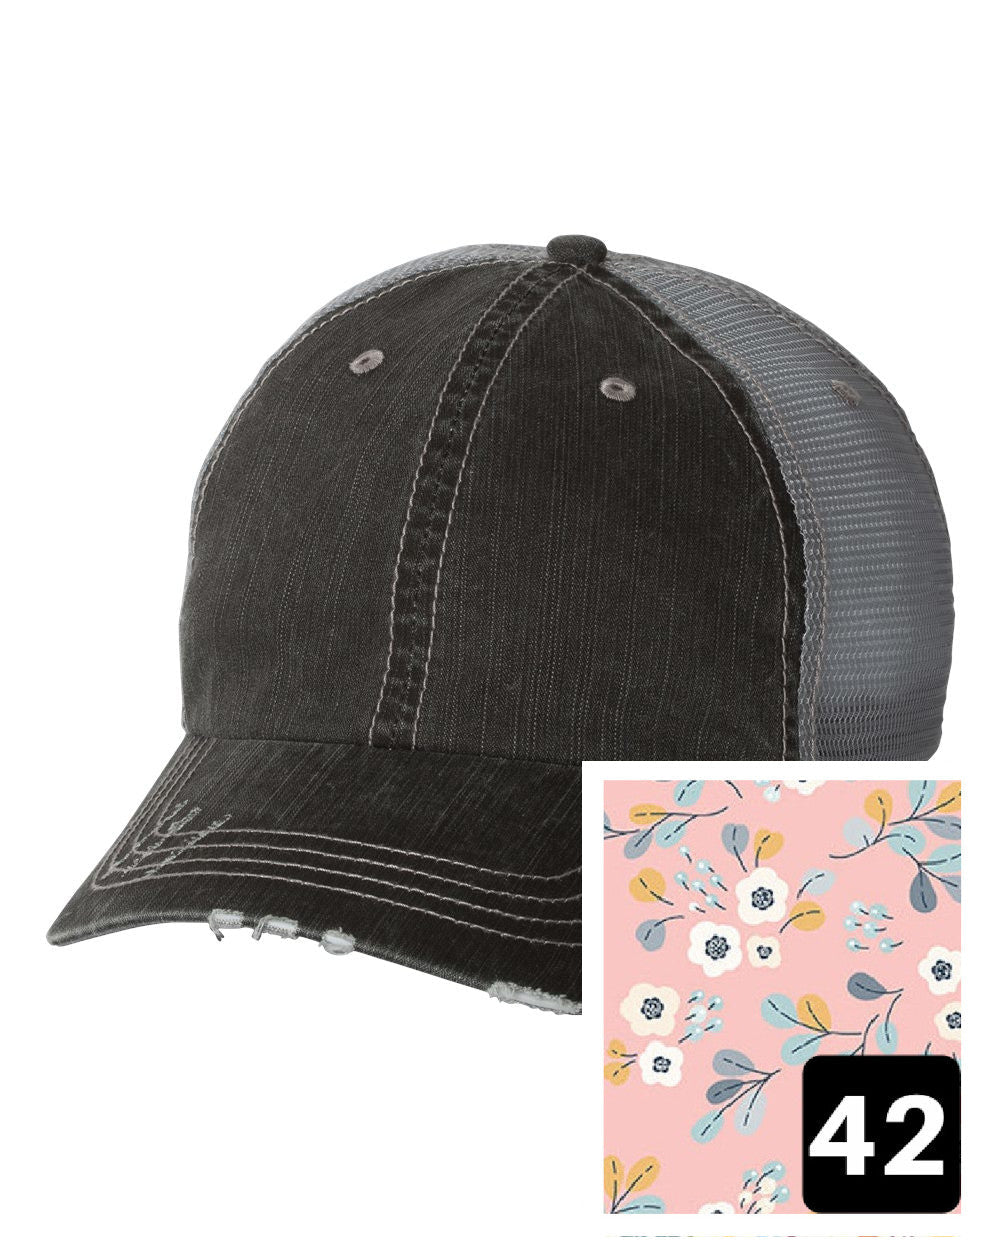 gray distressed trucker hat with light blue and pink mosaic fabric state of Idaho